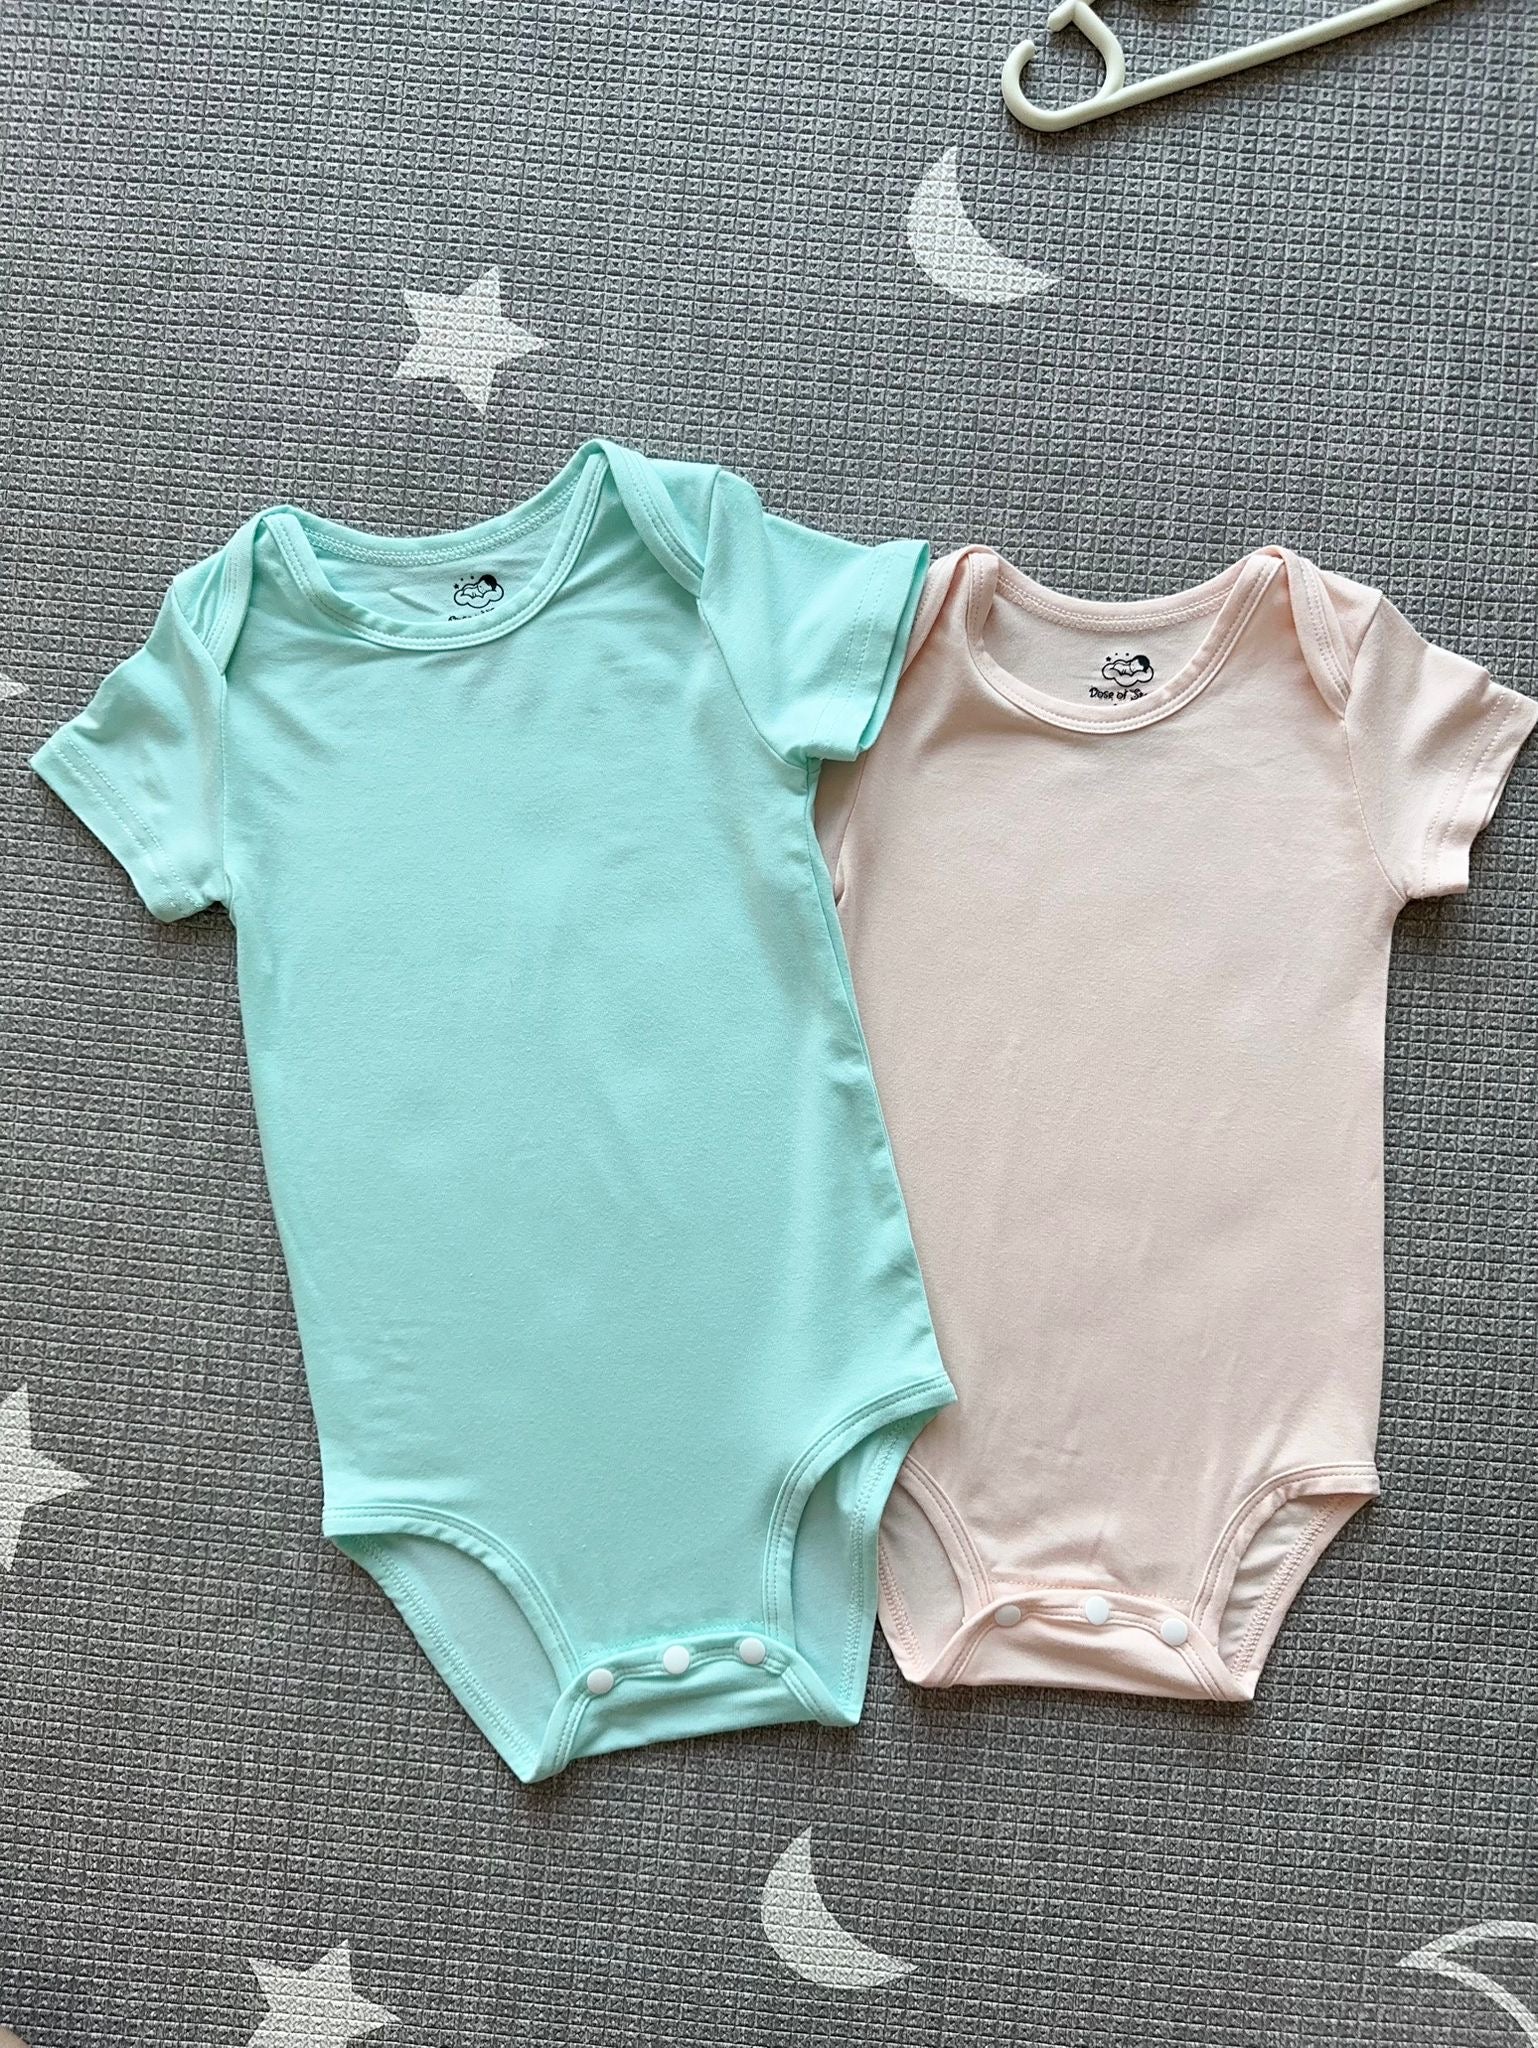 Dose of Steps | Plain Color Onesies (Designed in Singapore)